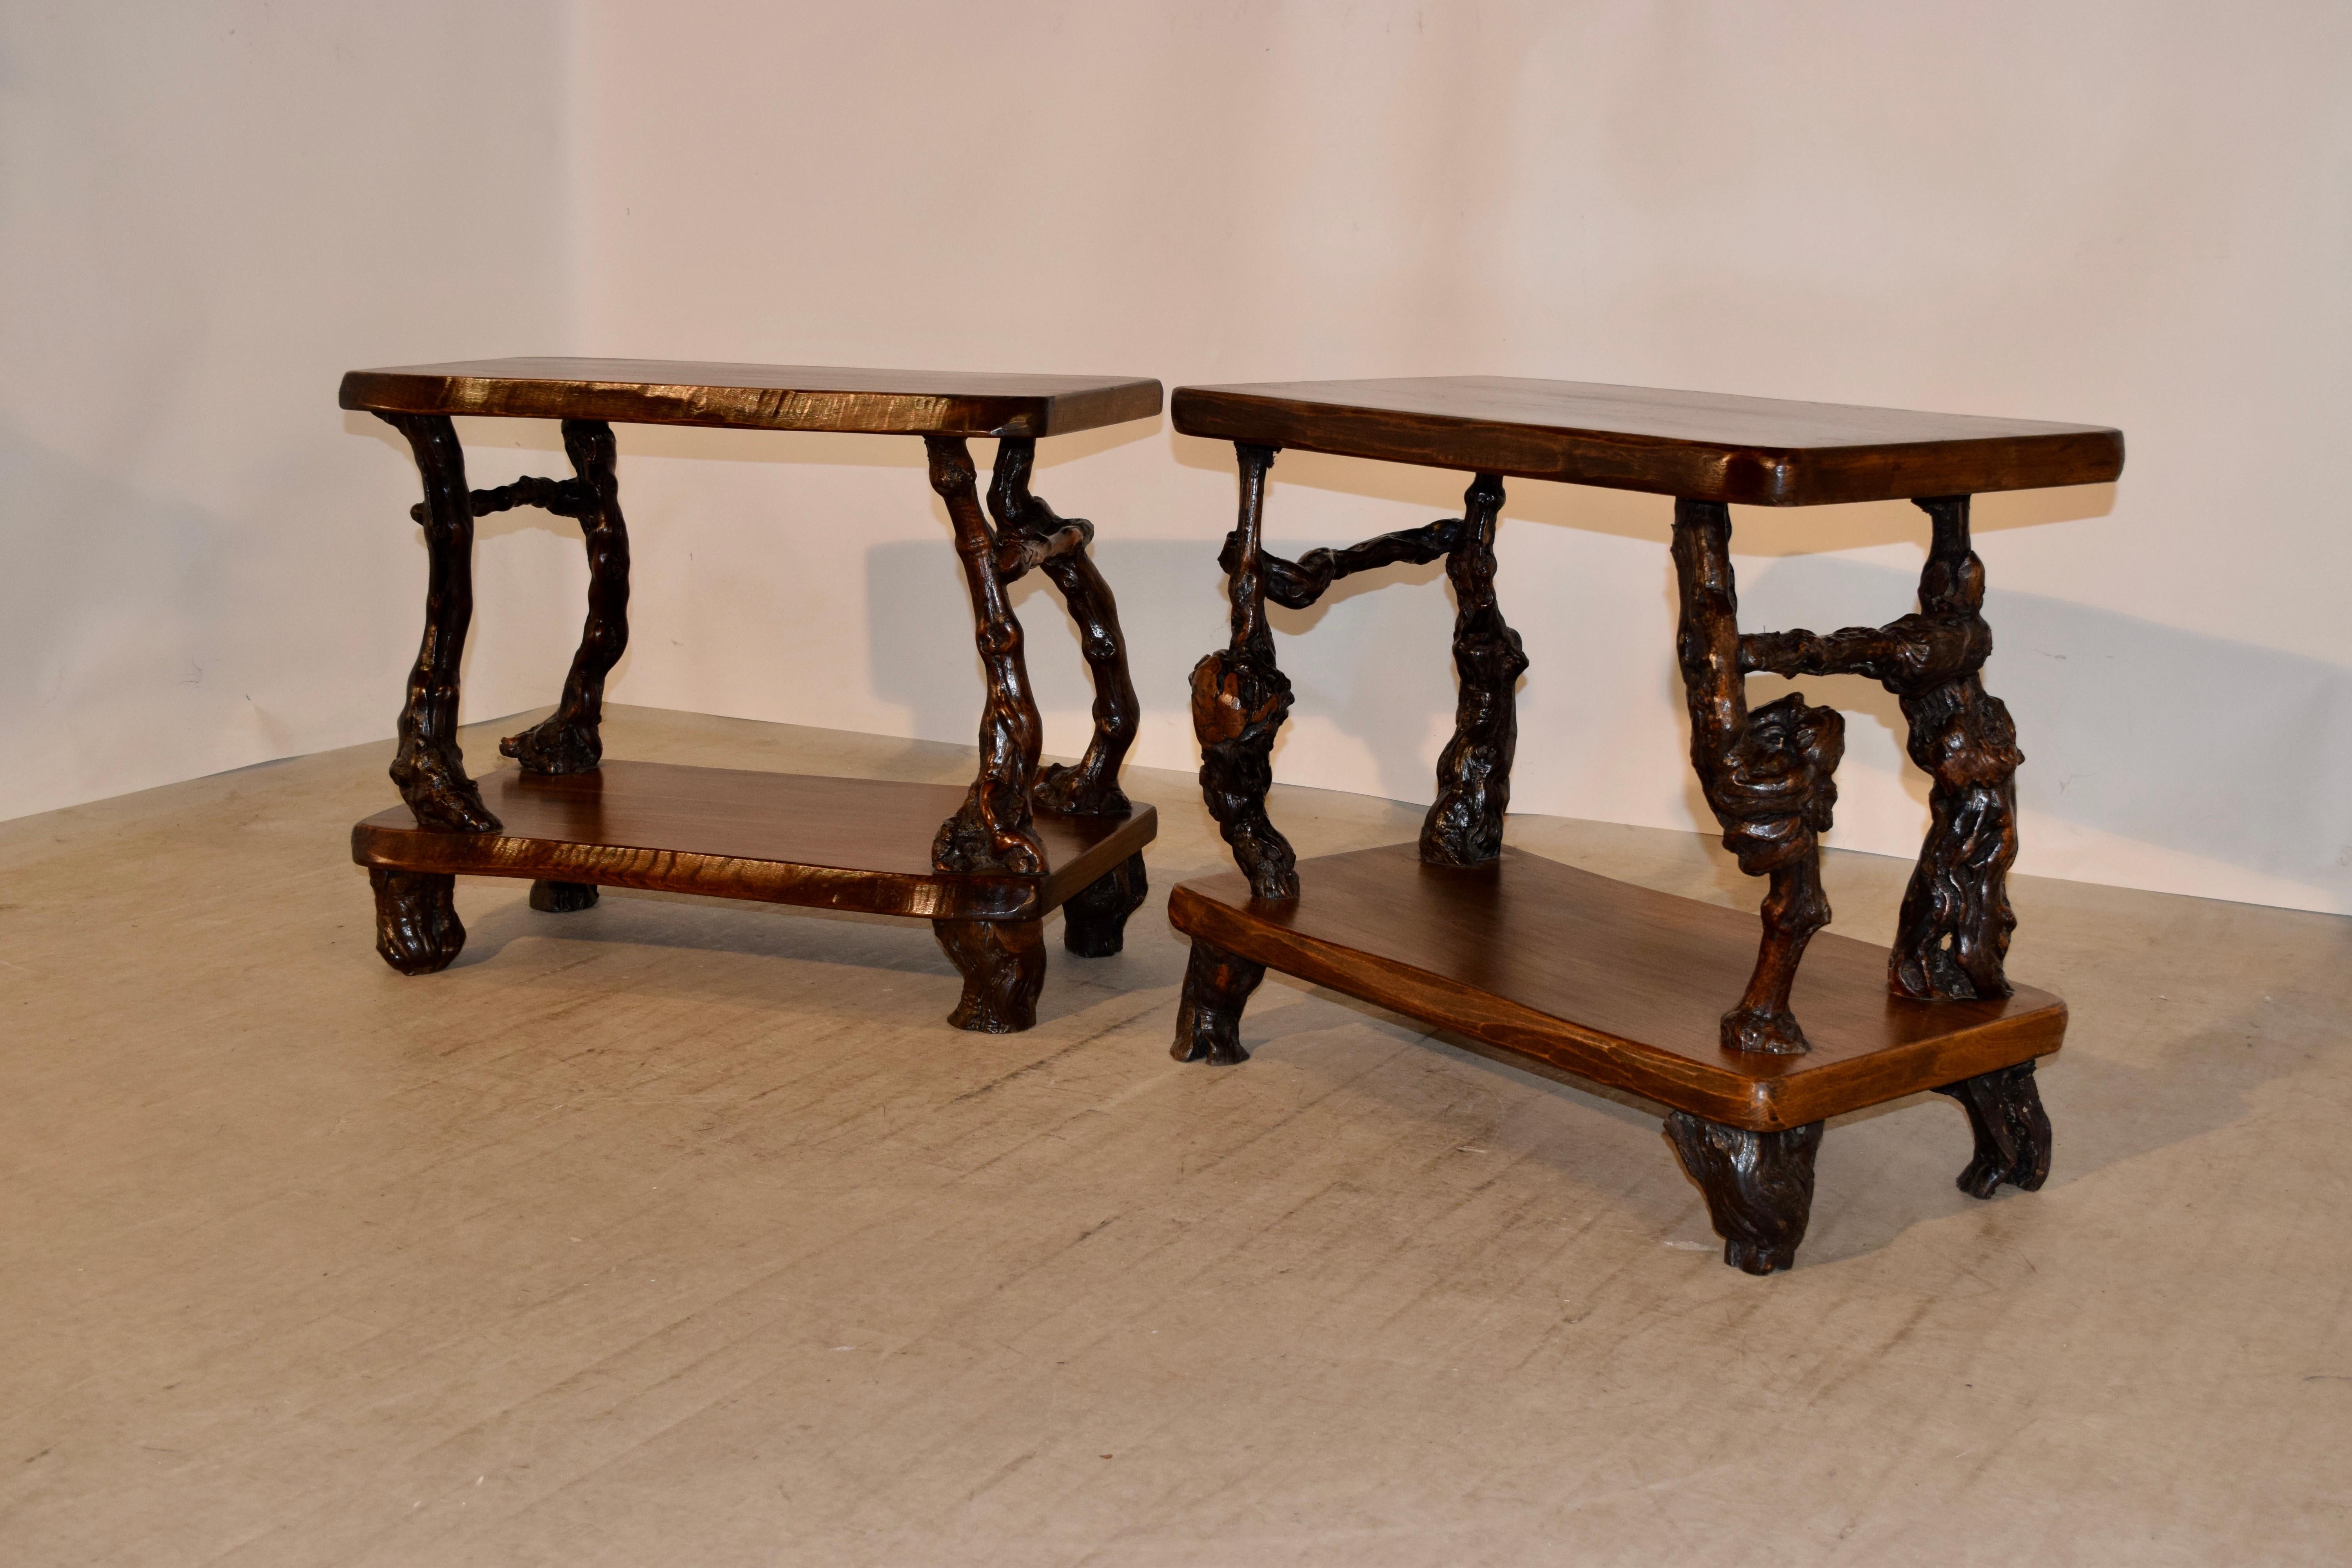 Pair of French tables made from walnut shelves separated by grapevine legs and stretchers, circa 1920s. The feet are also made from grapevines. The second table measures 31.38 H x 17.75 D x 25.75 H.
 